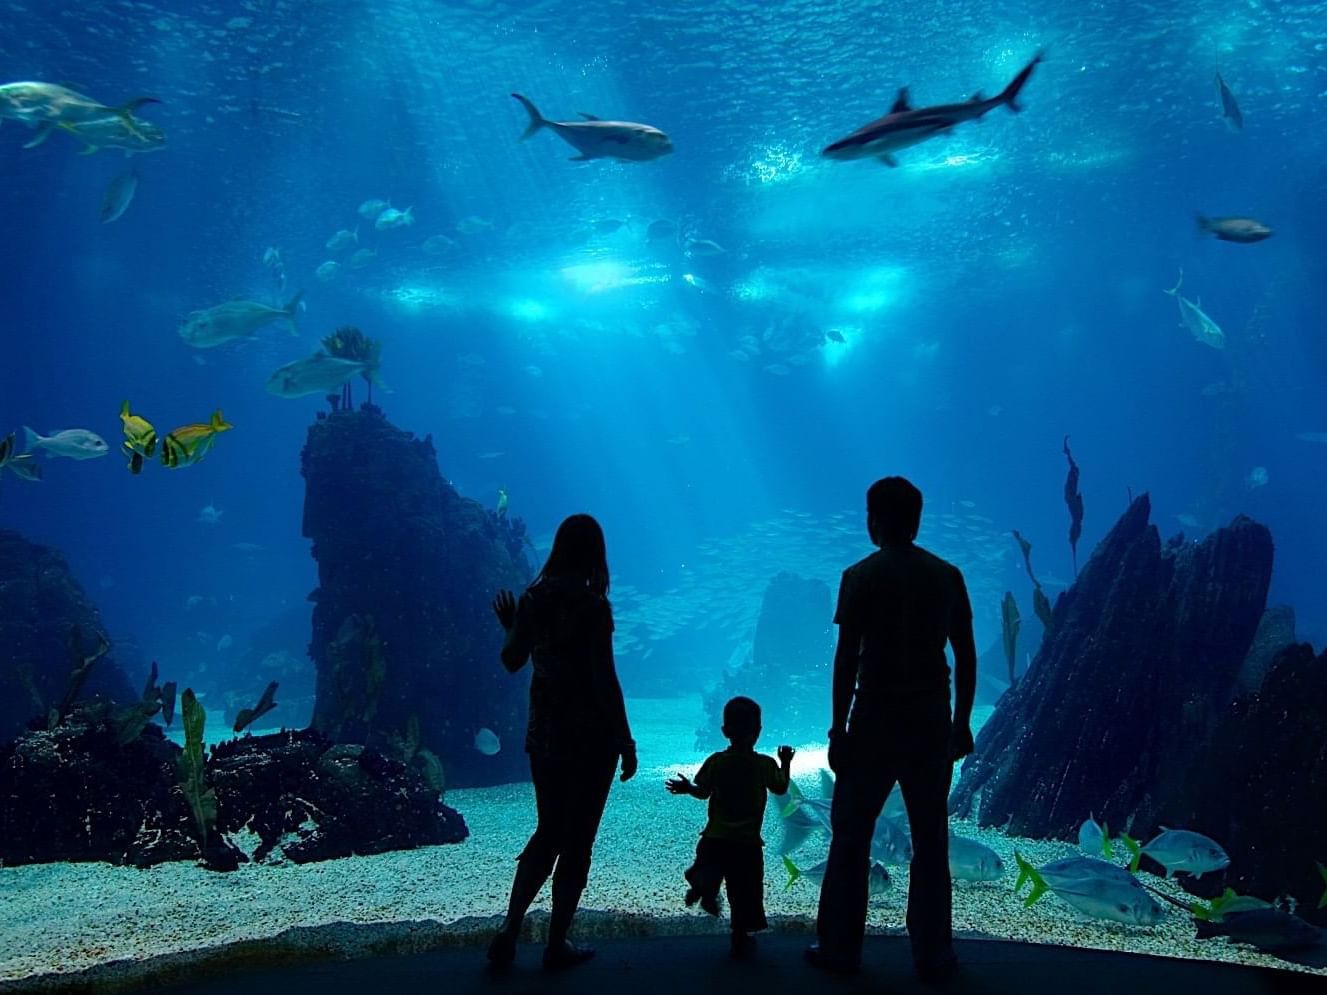 A mother, father, and son staring into an aquarium tank